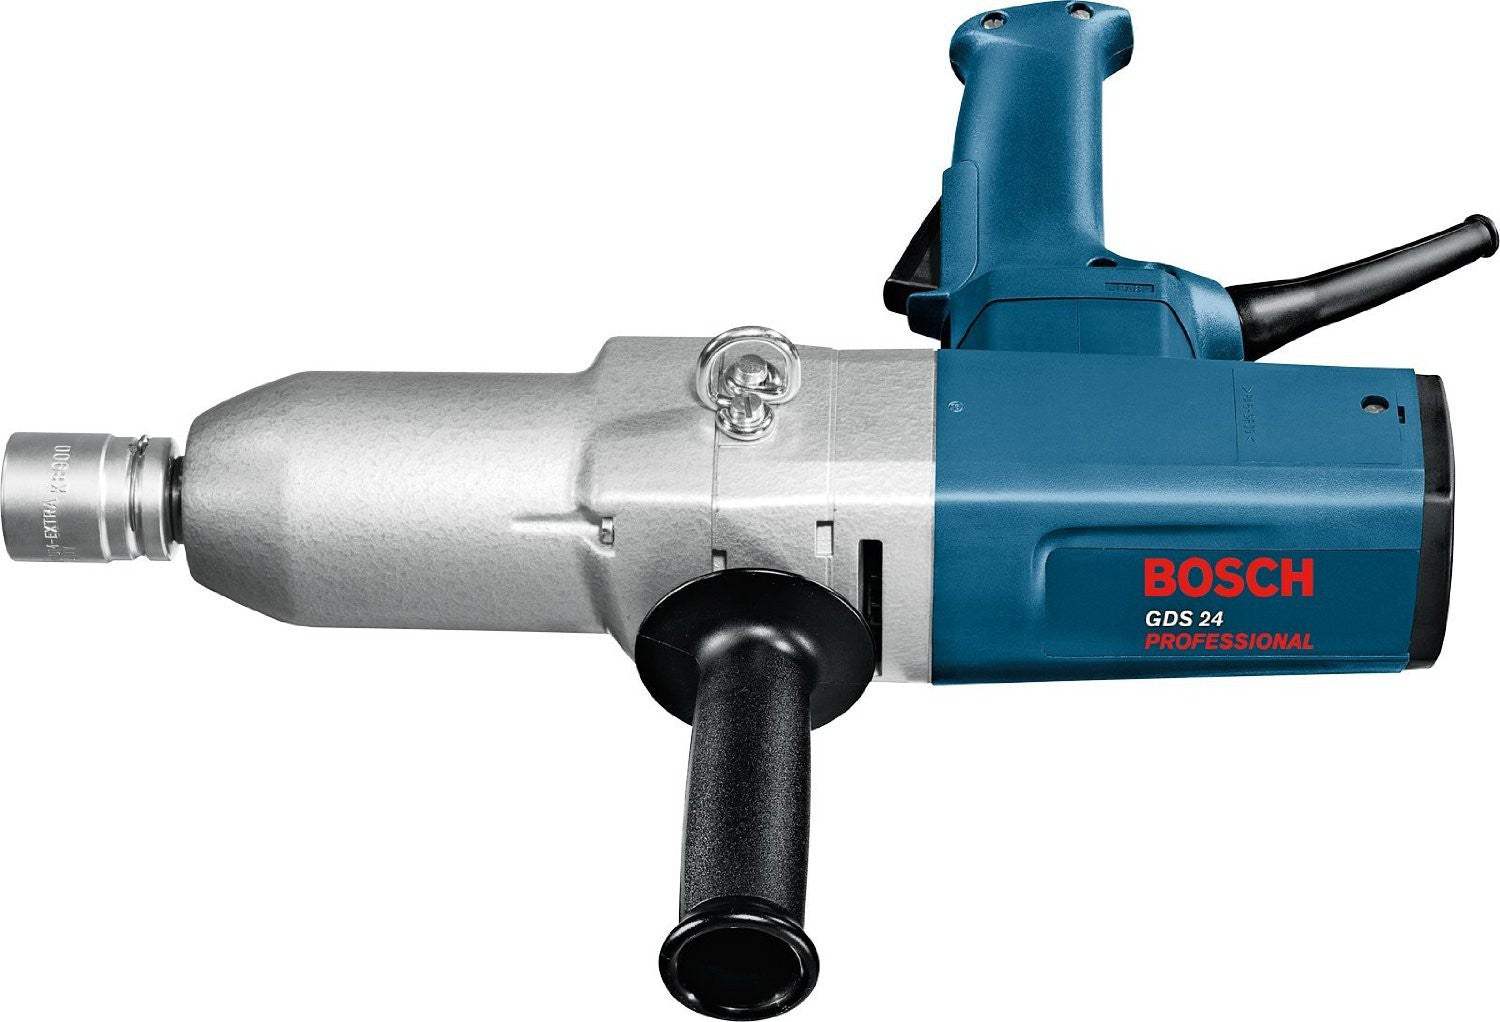 Bosch Professional Impact Wrench GDS 24 0601434108 Power Tool Services